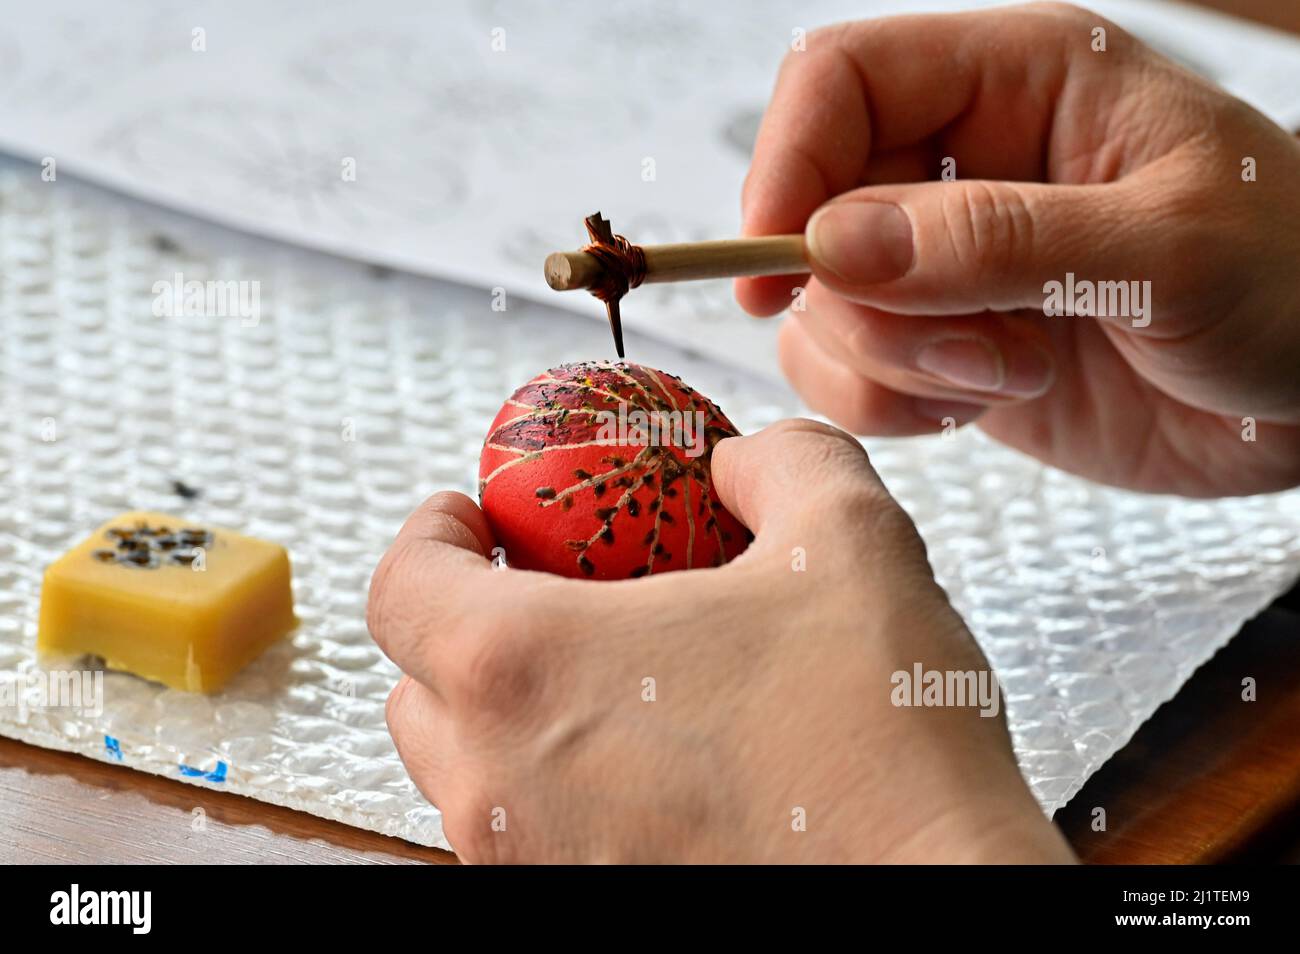 Olyphant, United States. 27th Mar, 2022. A woman places wax on a hollowed out egg that is then dipped in different eggs to make a Ukrainian Easter Egg. Pysanky is the art of writing with wax on hollowed eggs to make Ukrainian Easter Eggs. A class was held to teach Pysanky and funds were collected to be sent to Ukraine. (Photo by Aimee Dilger/SOPA Images/Sipa USA) Credit: Sipa USA/Alamy Live News Stock Photo